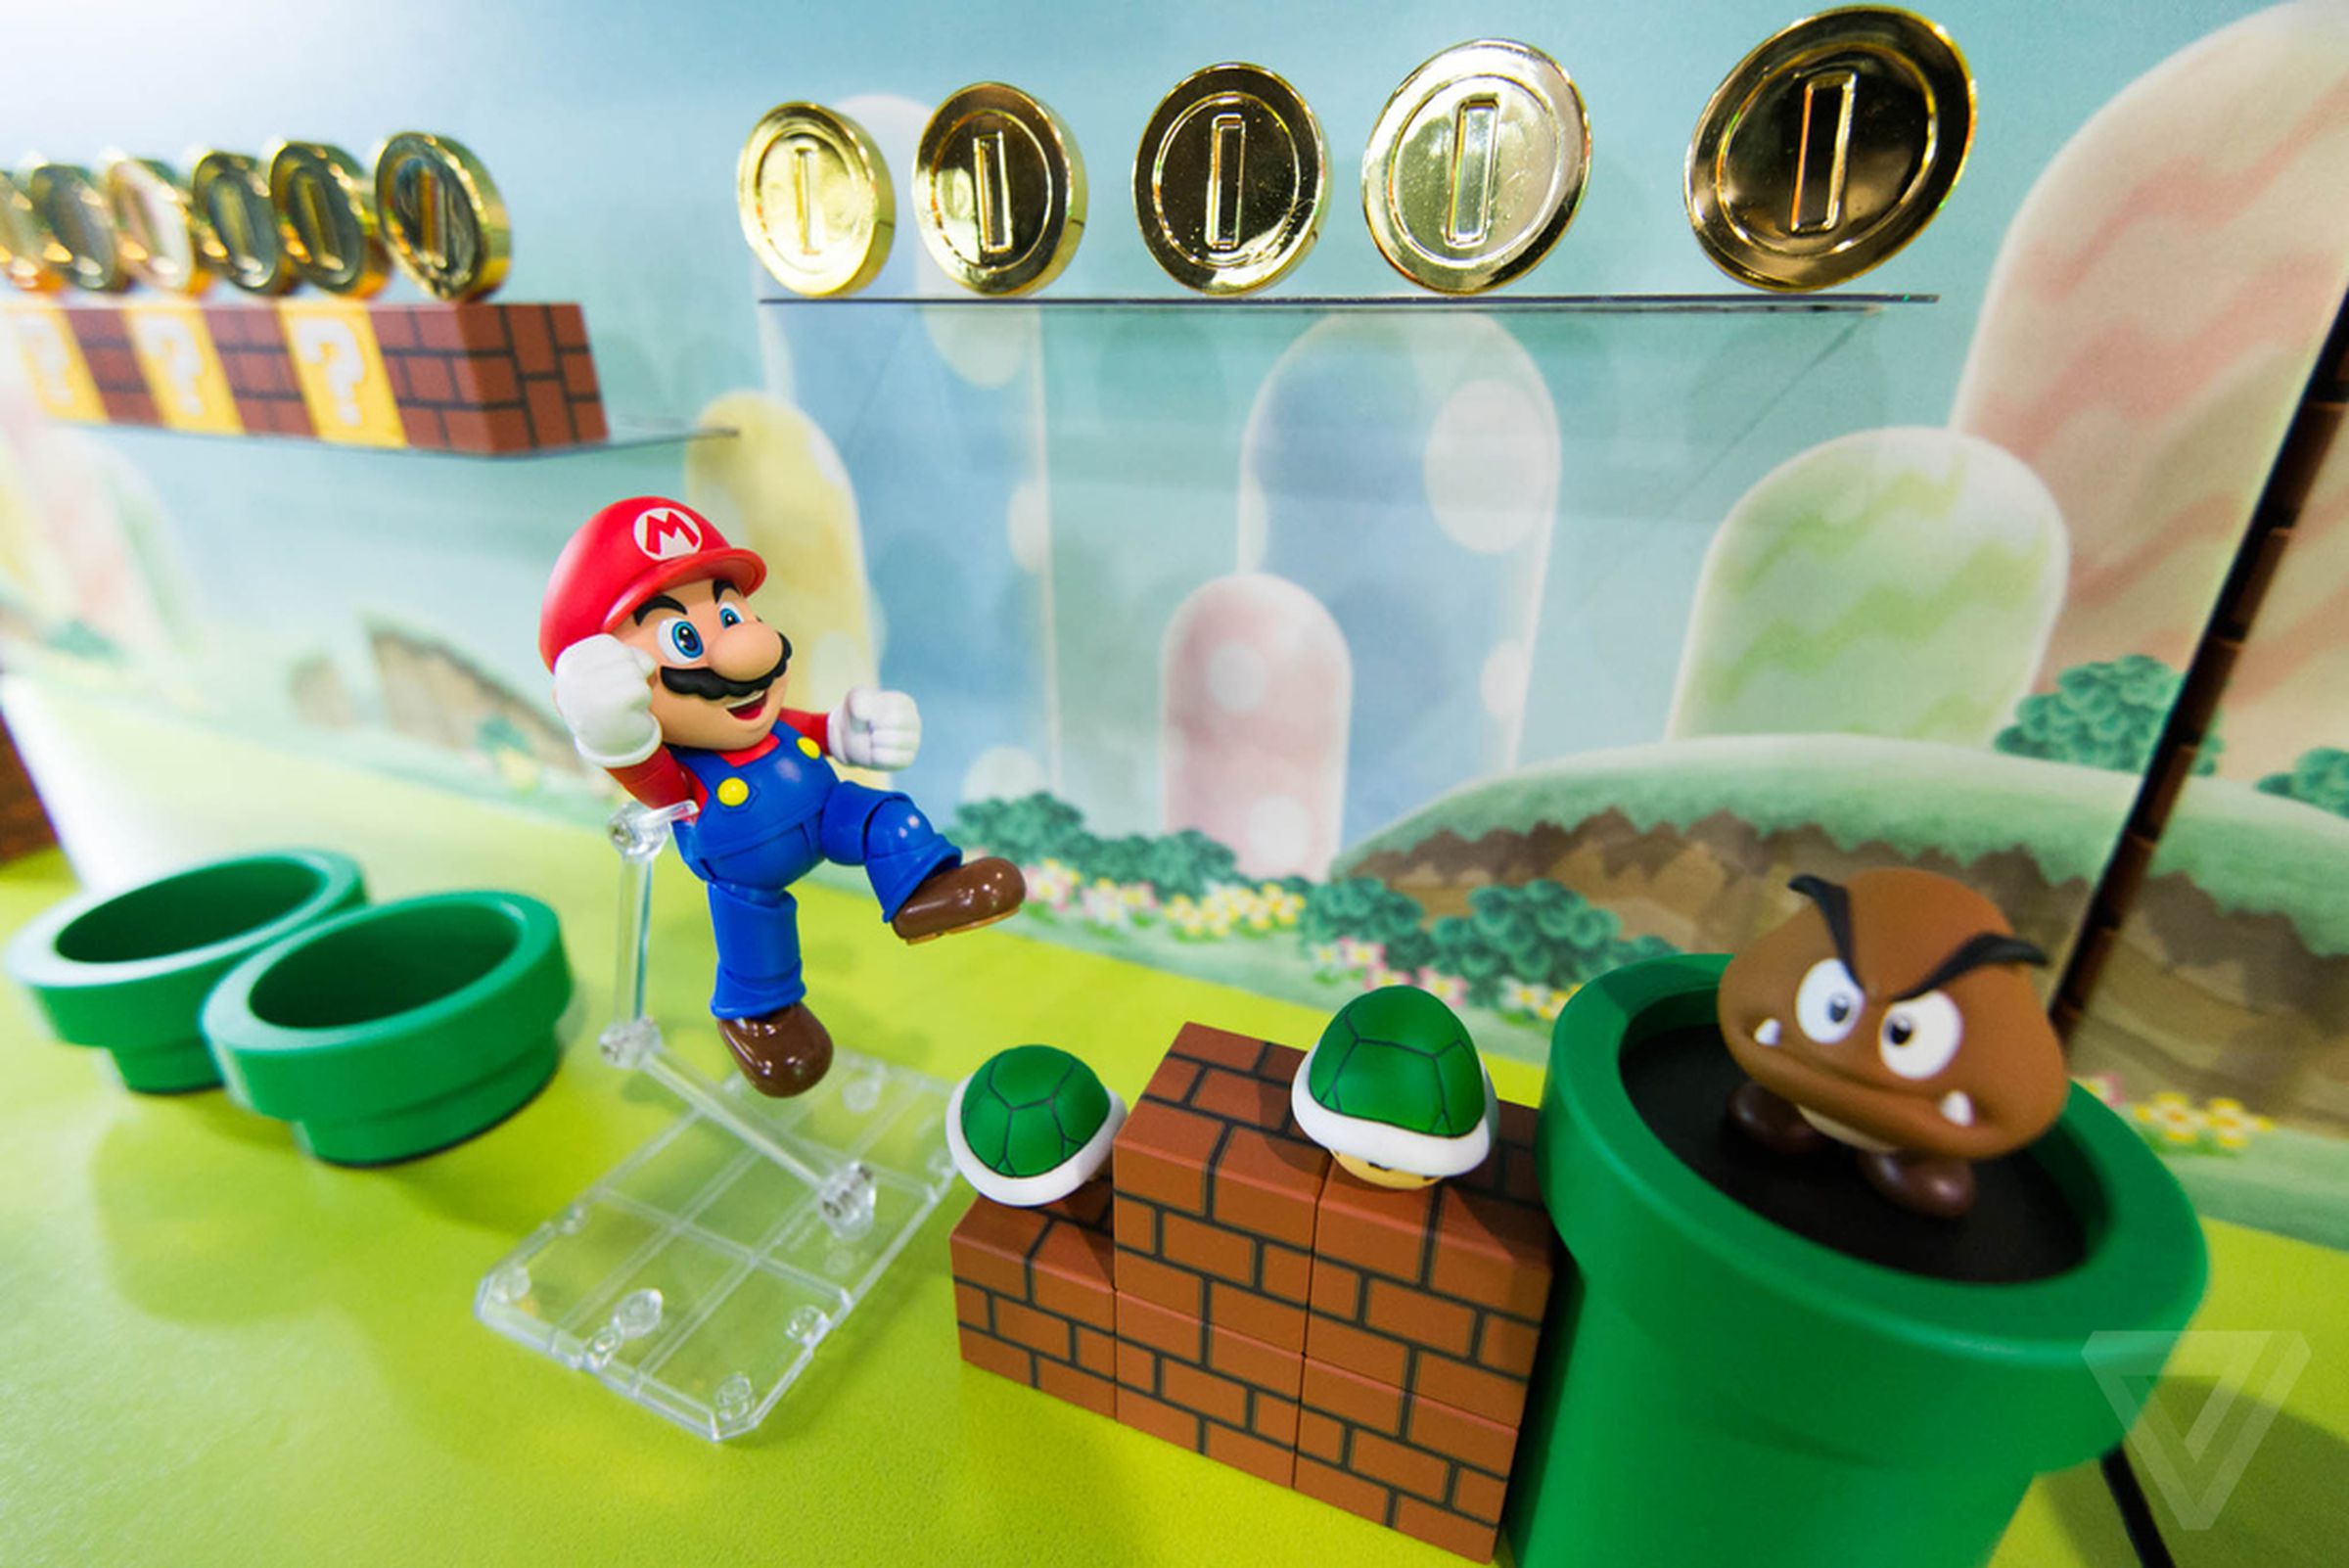 Toy Fair 2014 in pictures